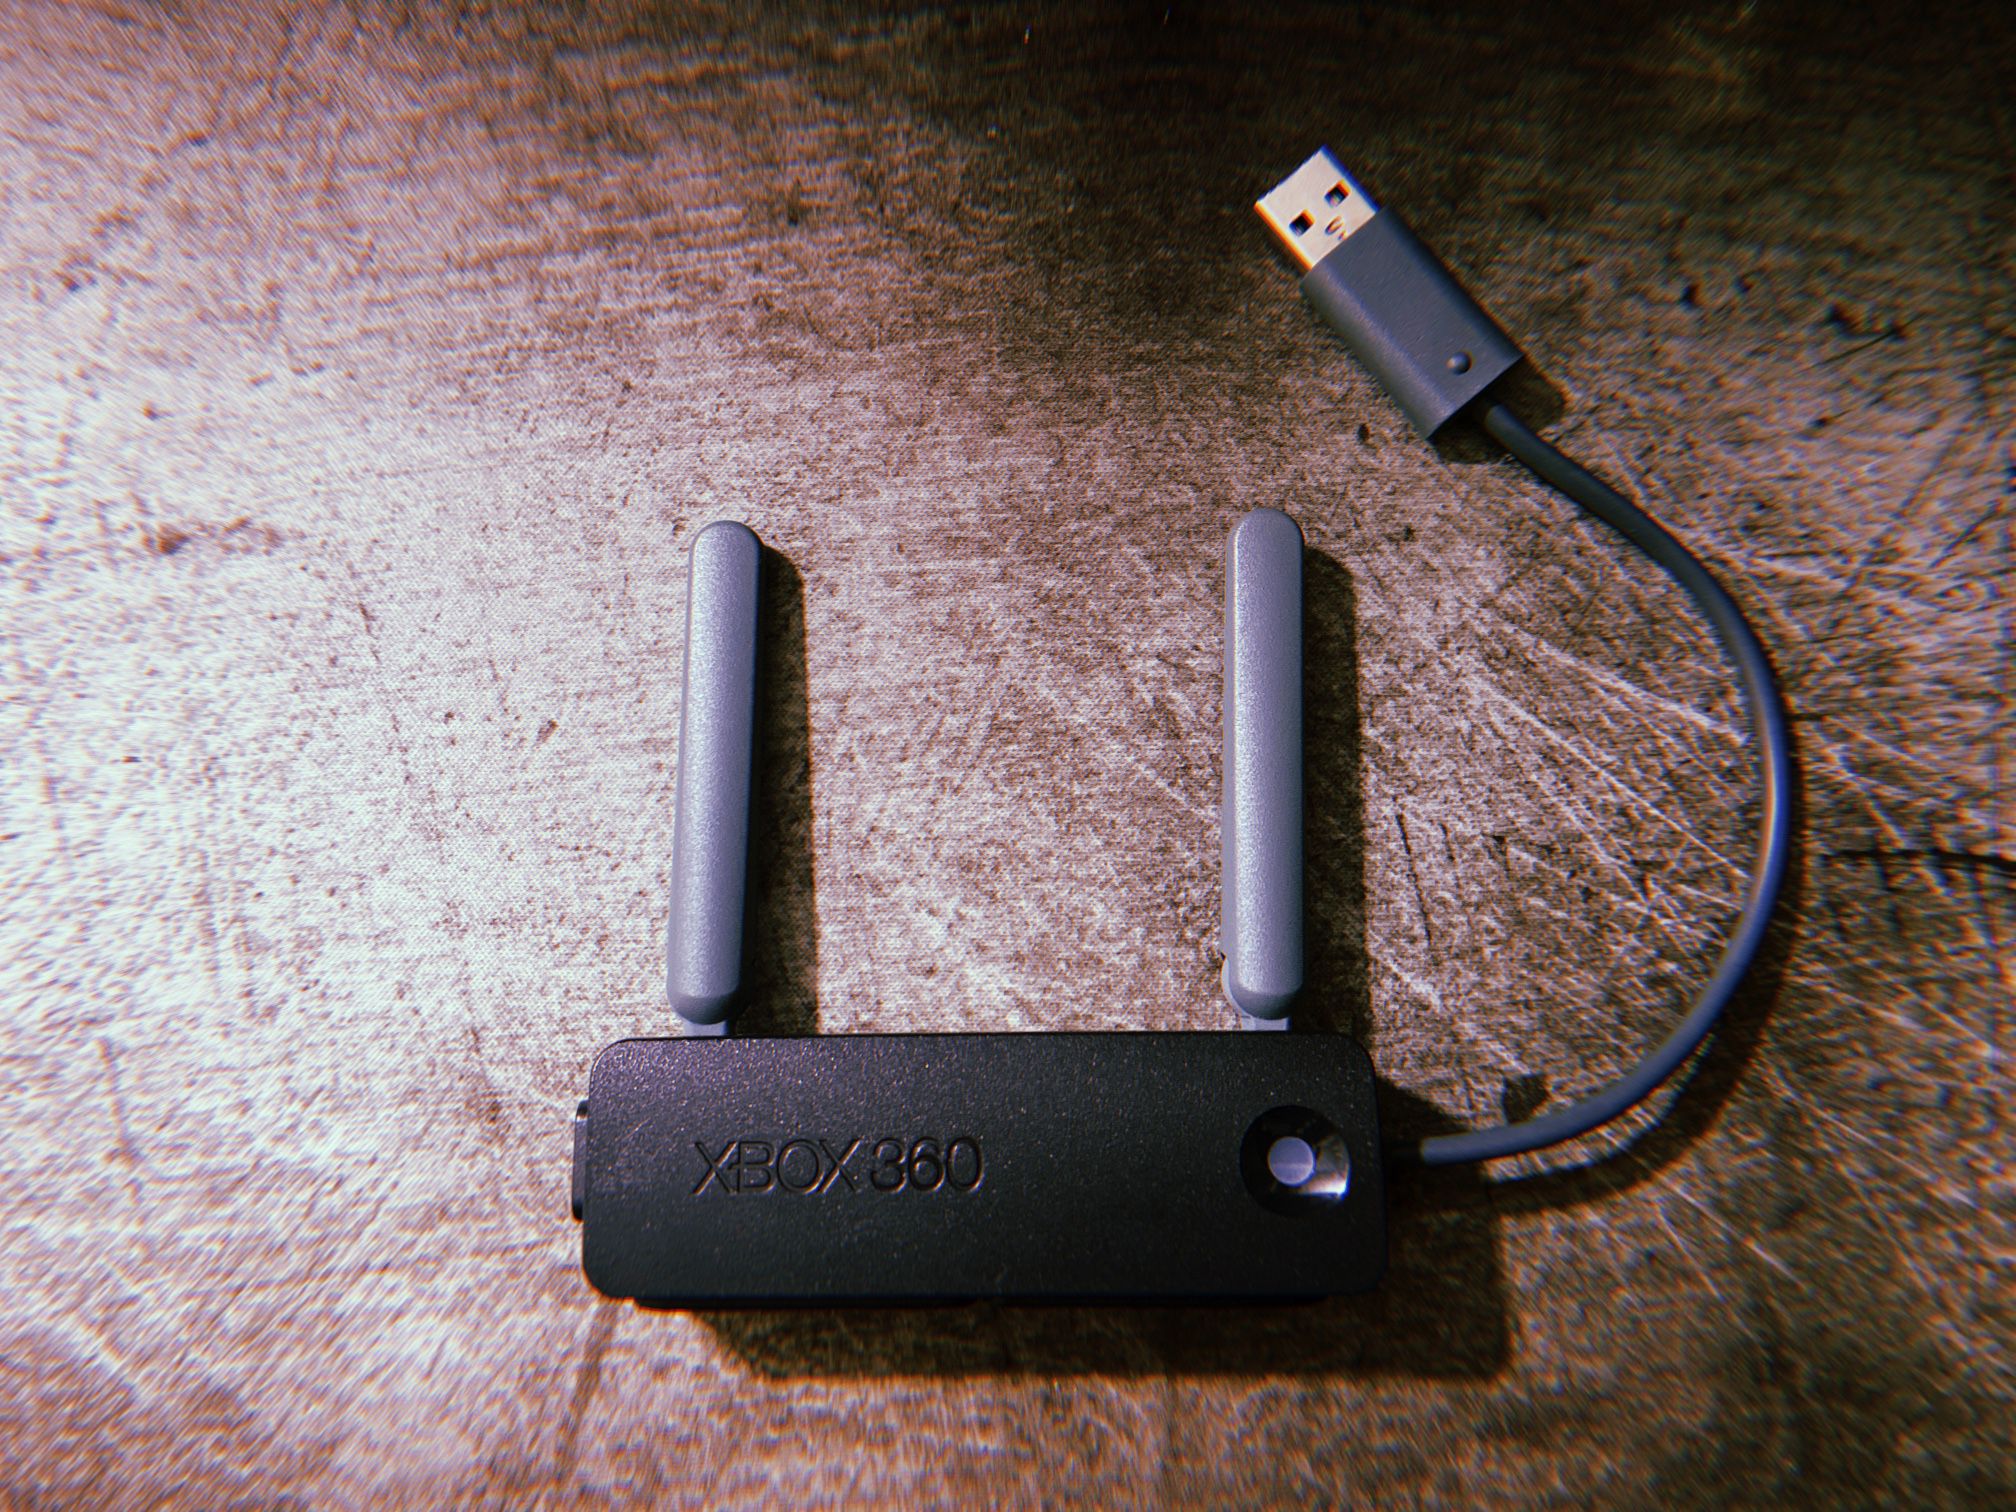 Xbox 360 Microsoft Wireless Networking Adapter And 